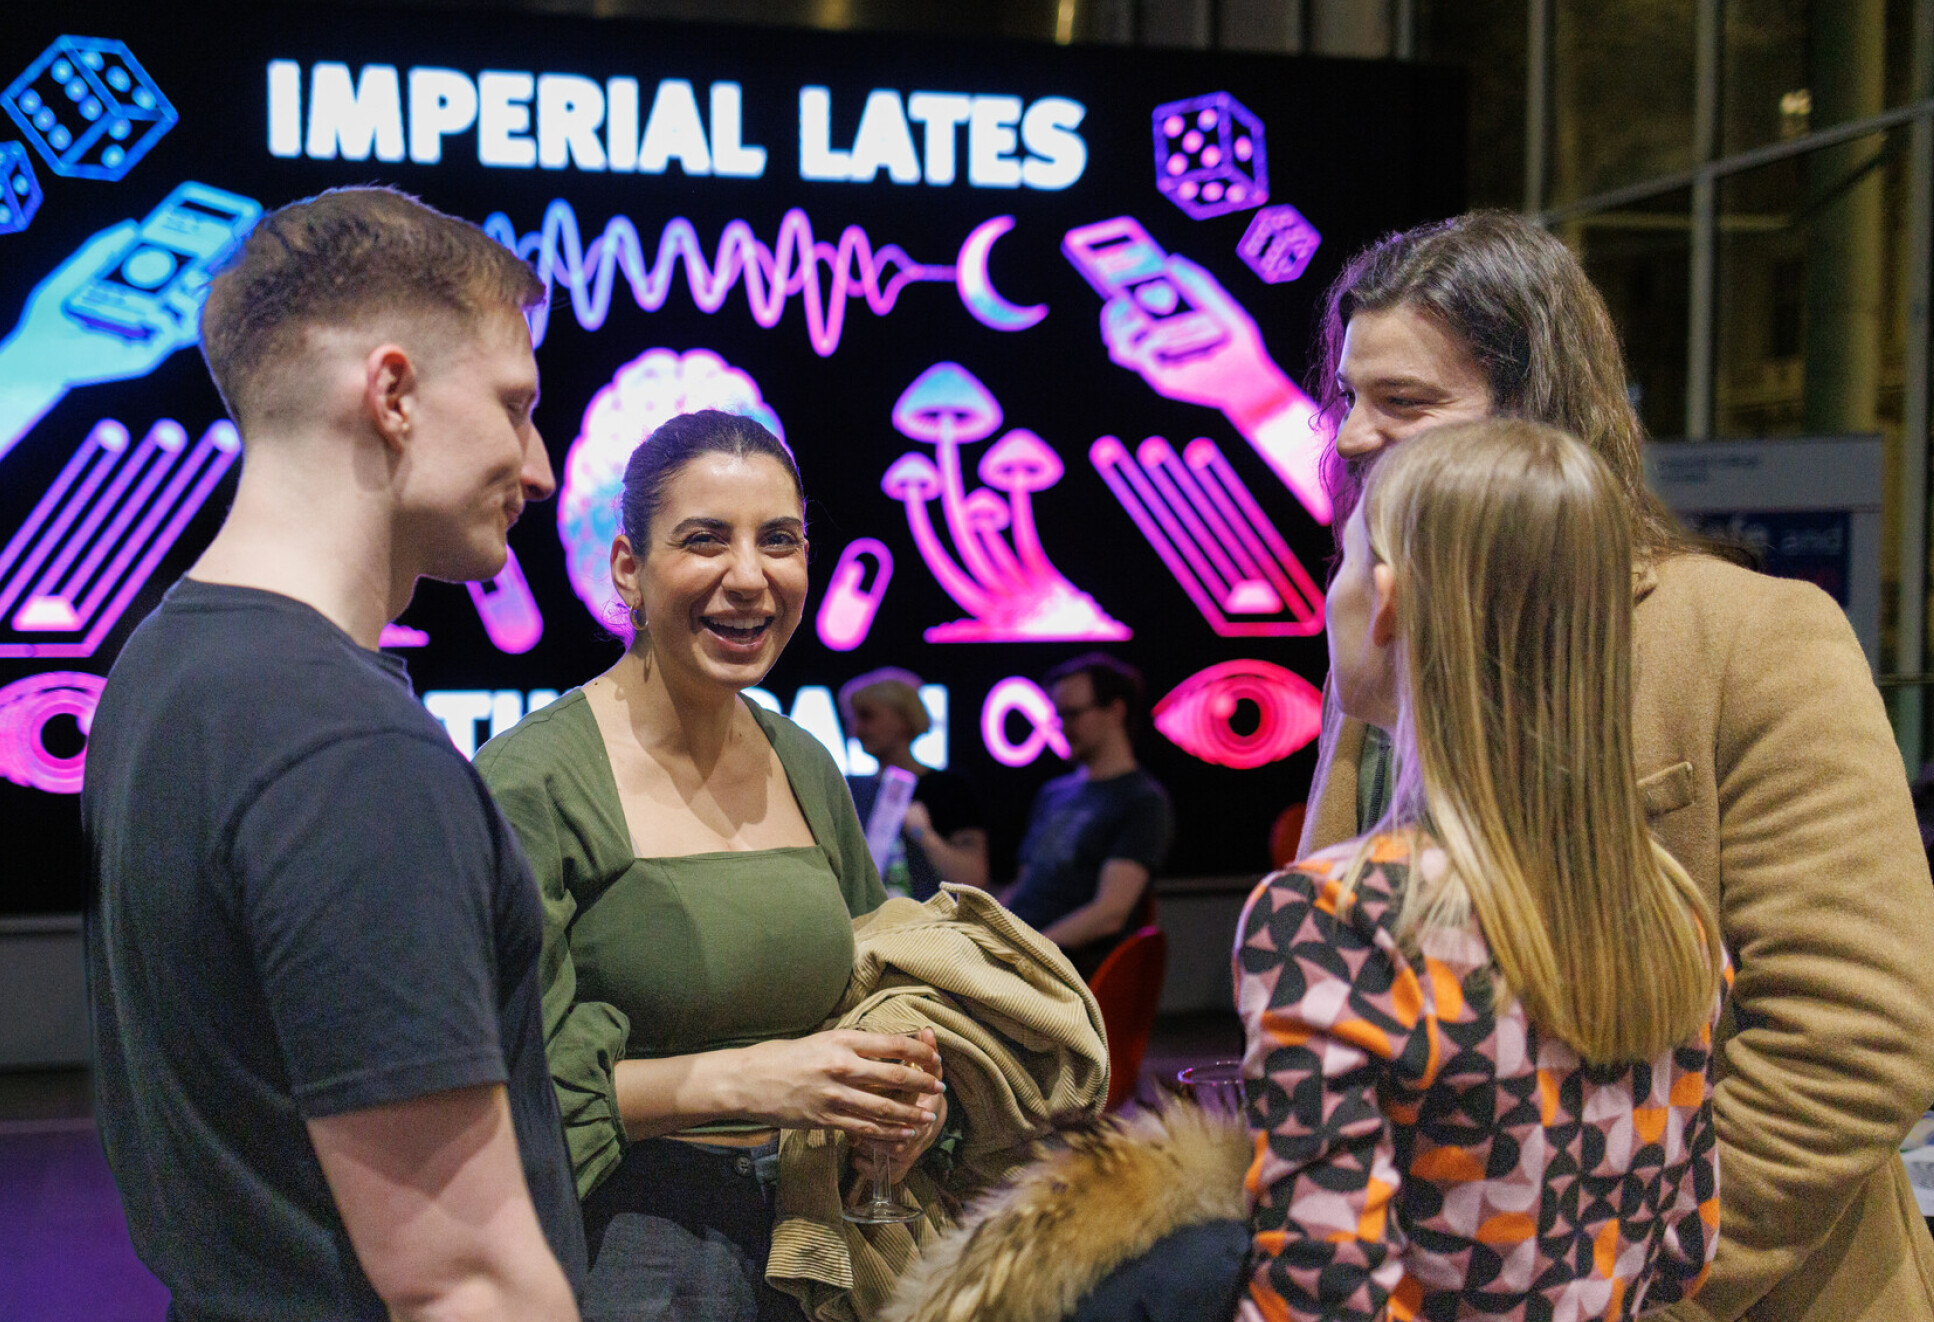 Four friends laughing in front of Imperial Lates sign